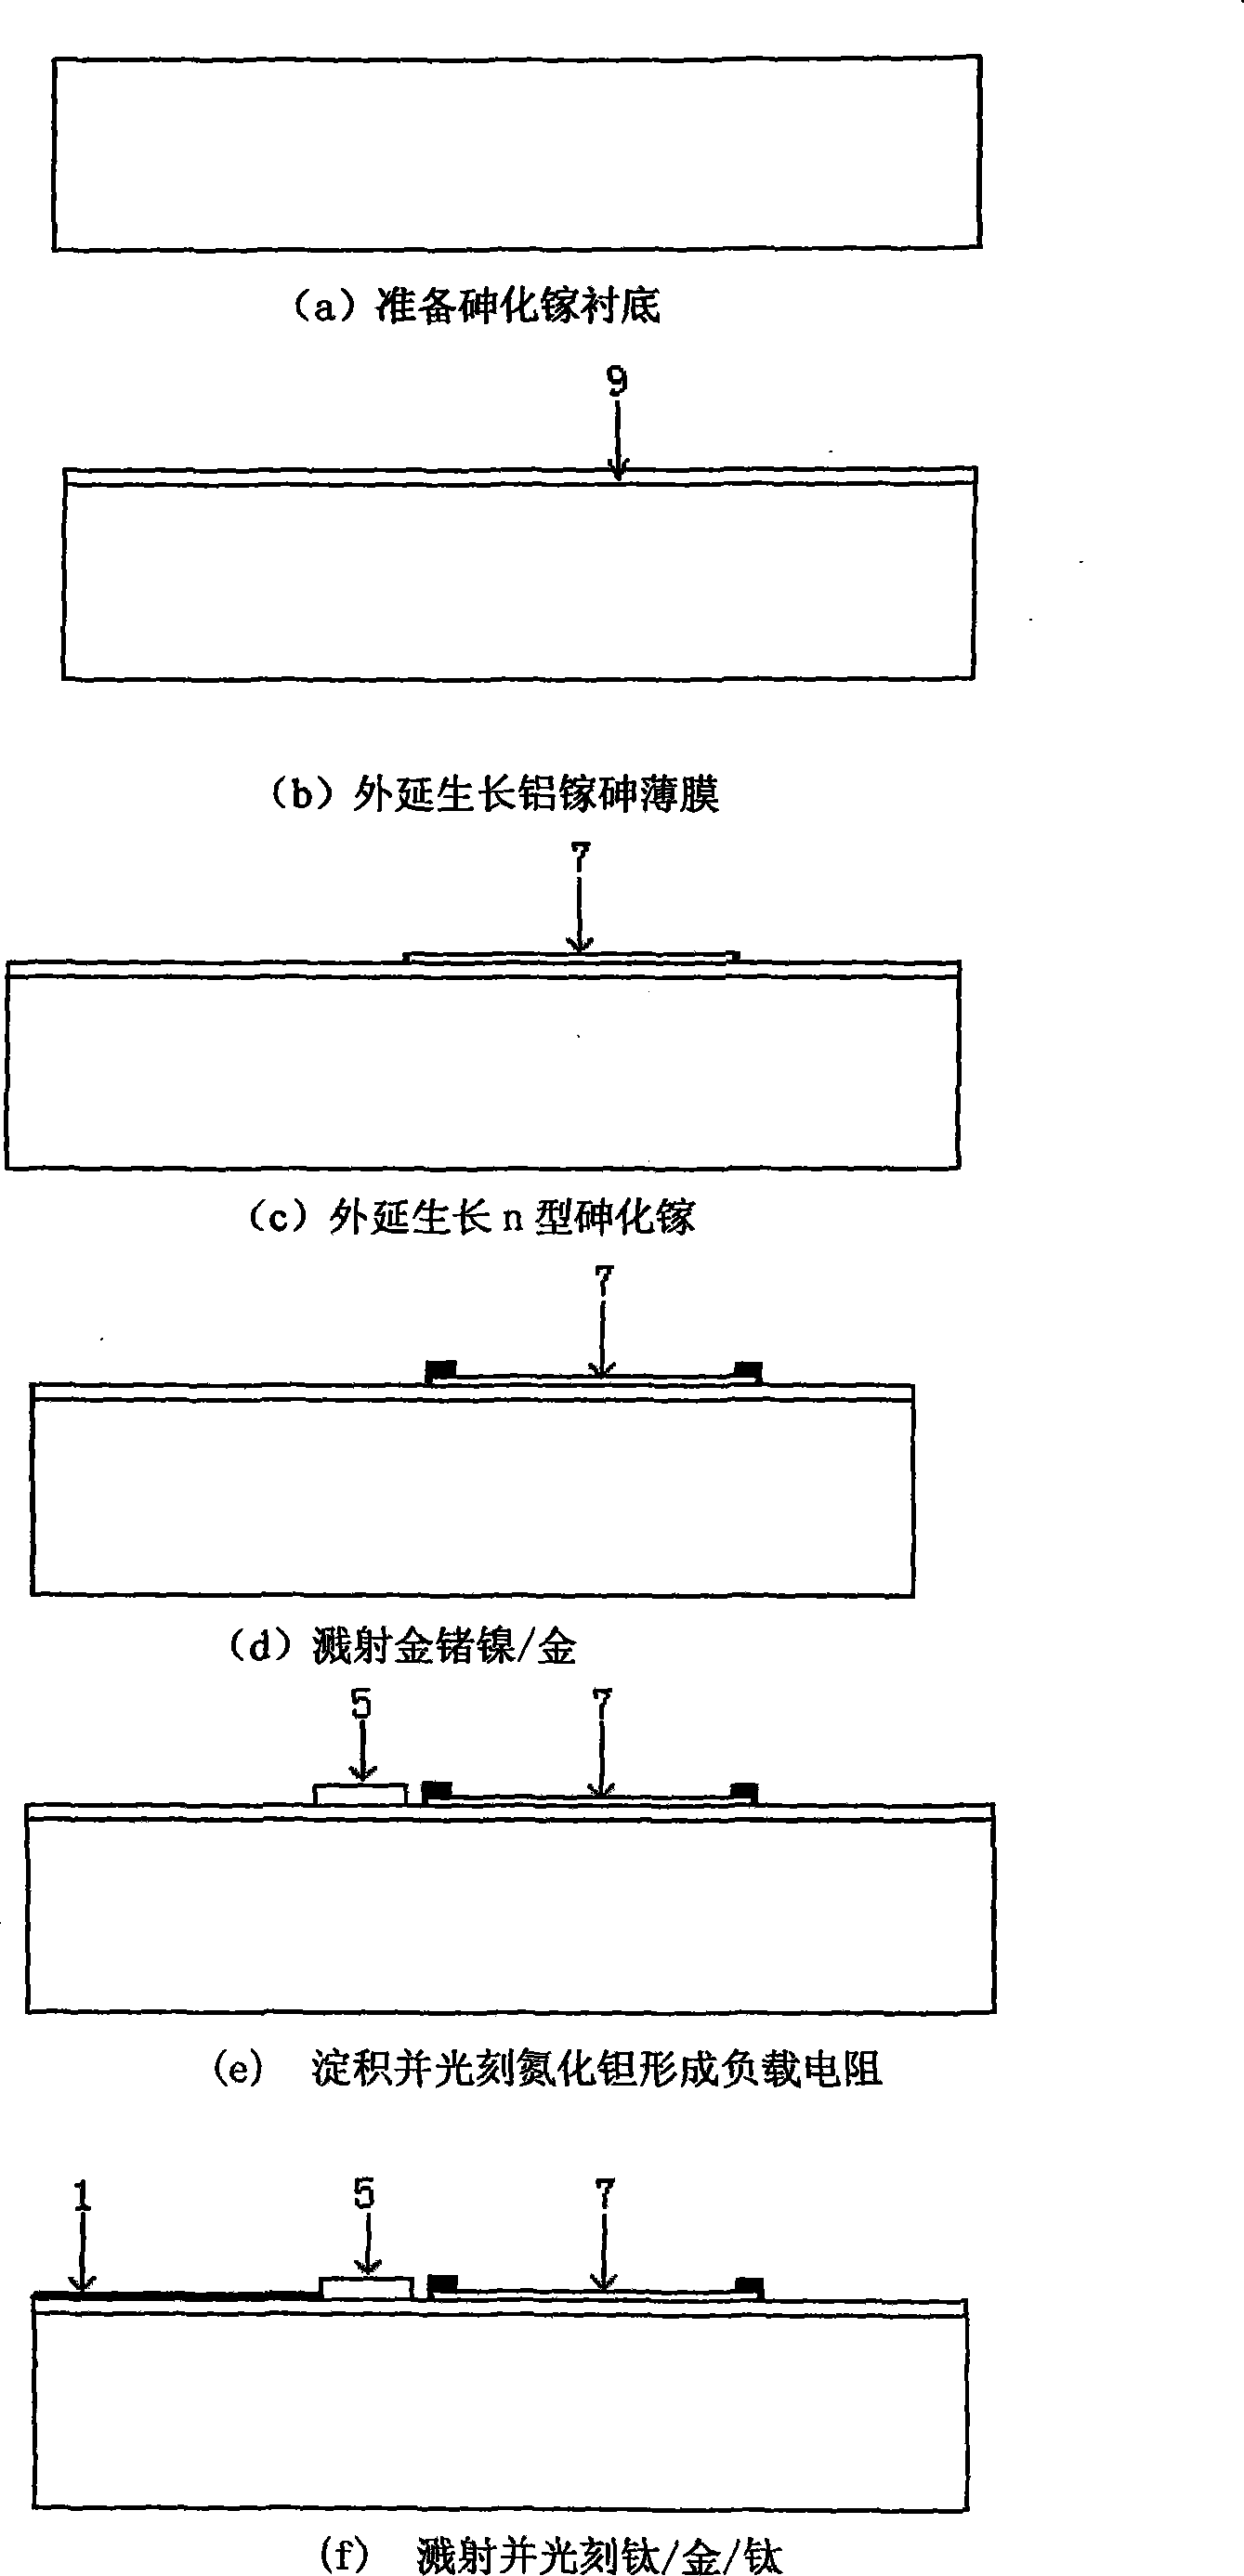 Wireless receiving microelectronic mechanical microwave power sensor and manufacturing method therefor